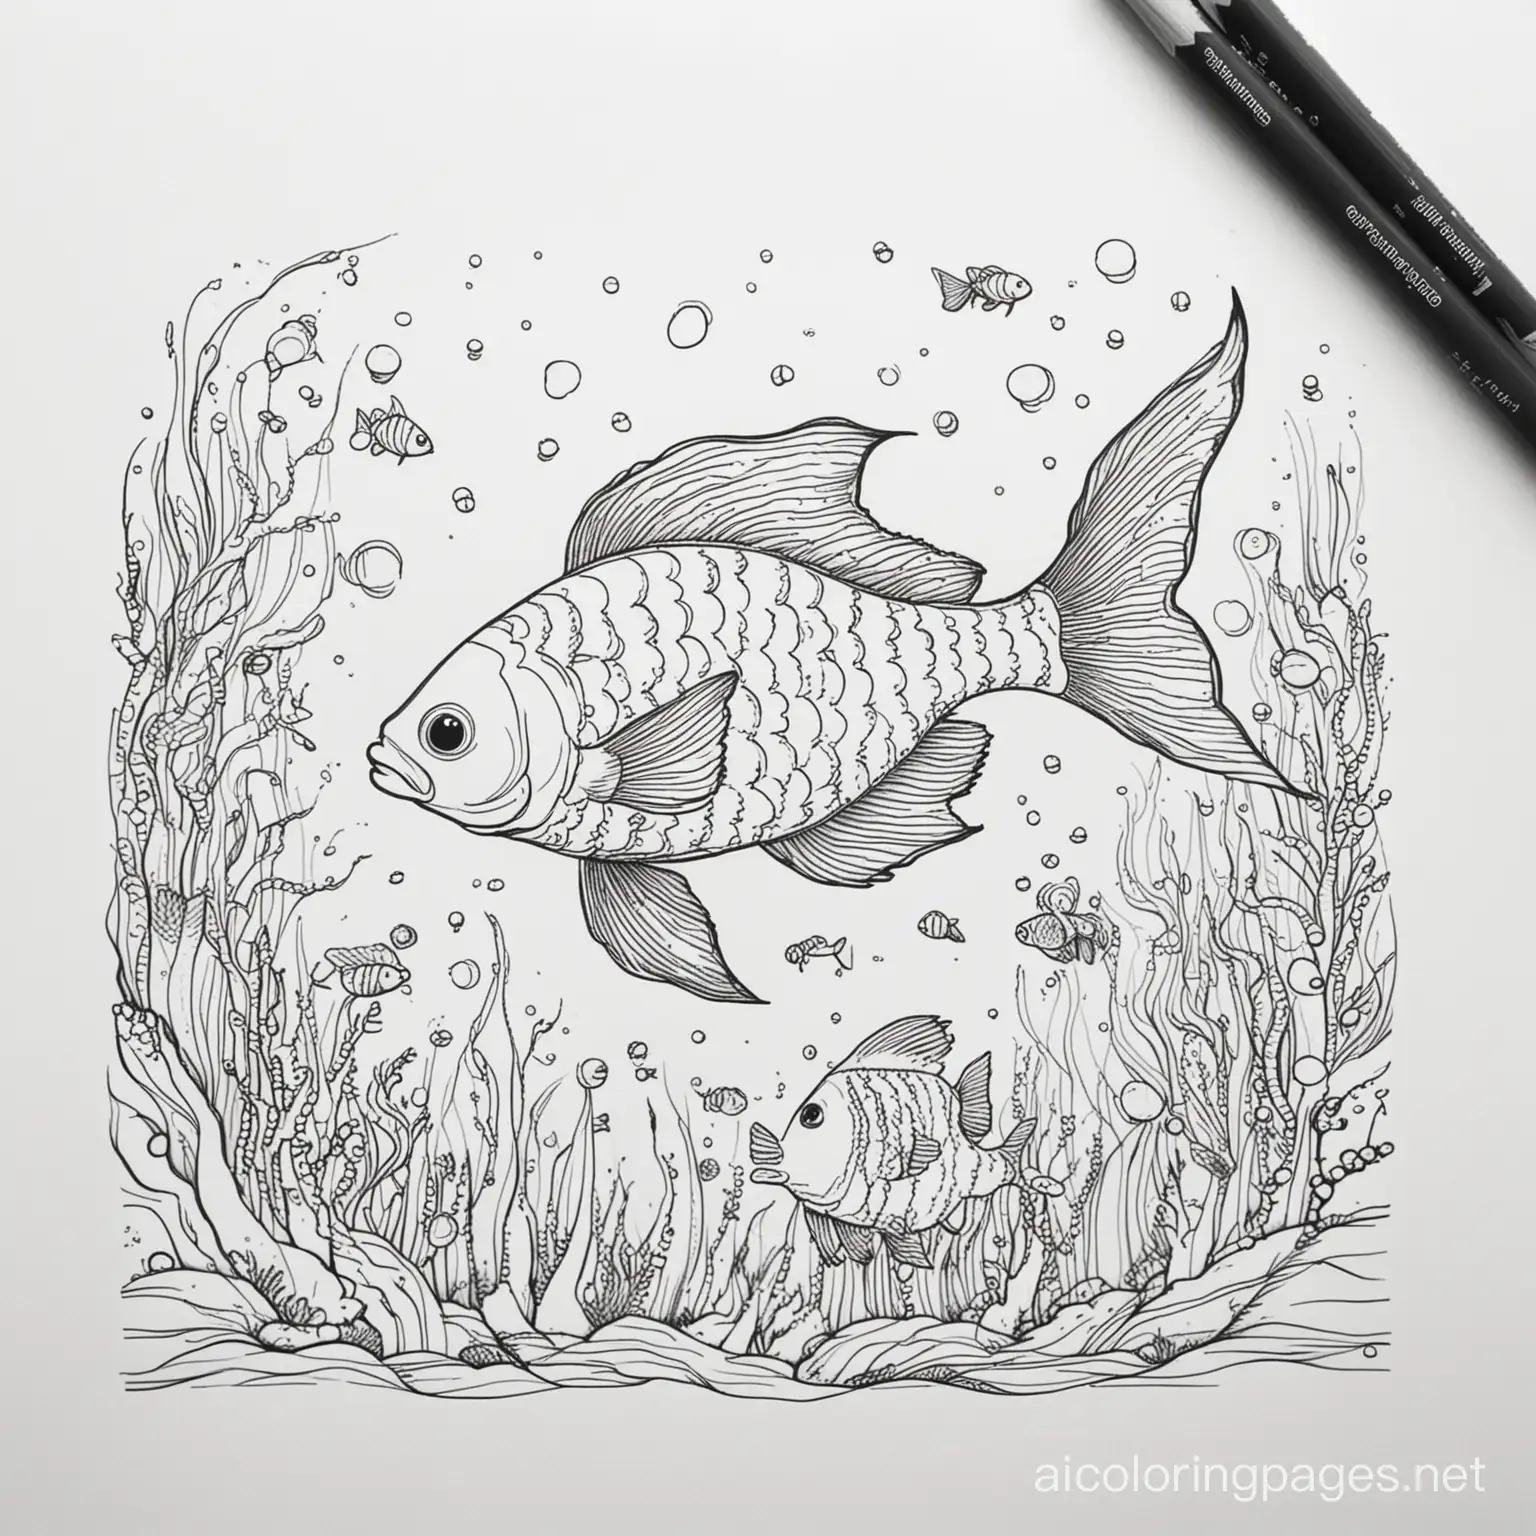 Underwater-Fish-Coloring-Page-for-Kids-Simple-Line-Art-on-White-Background